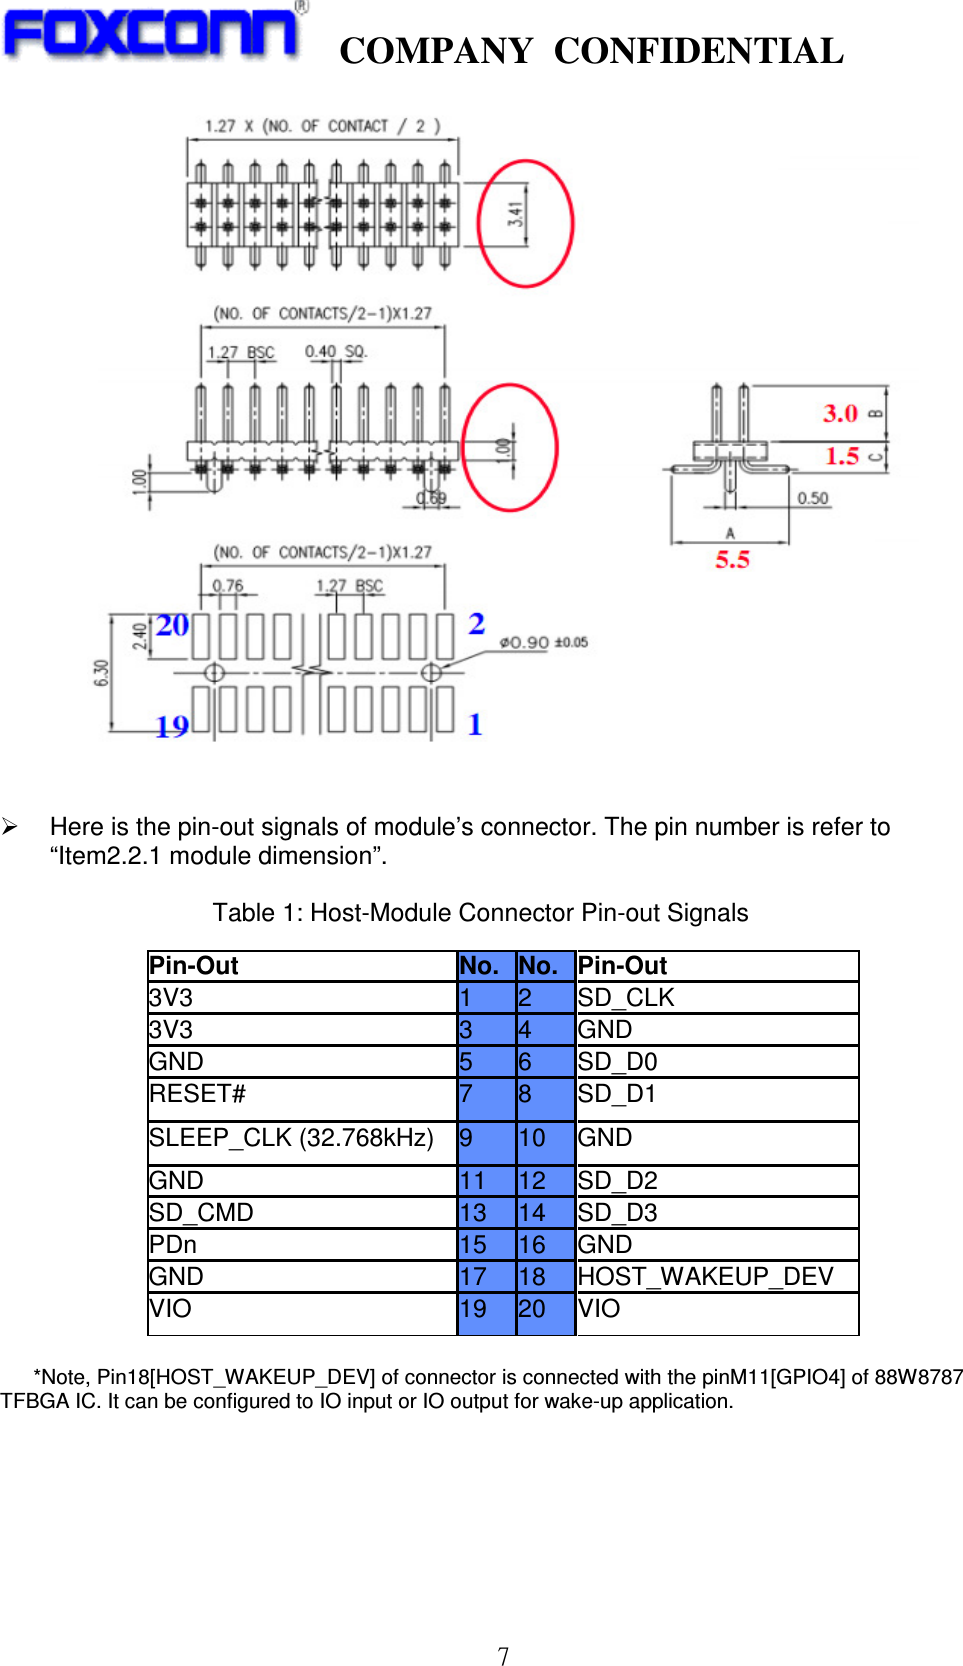    COMPANY  CONFIDENTIAL             7      Here is the pin-out signals of module’s connector. The pin number is refer to “Item2.2.1 module dimension”.  Table 1: Host-Module Connector Pin-out Signals Pin-Out  No. No. Pin-Out 3V3  1  2  SD_CLK 3V3  3  4  GND GND  5  6  SD_D0 RESET#  7  8  SD_D1 SLEEP_CLK (32.768kHz)  9  10  GND GND  11  12  SD_D2 SD_CMD  13  14  SD_D3 PDn  15  16  GND GND  17  18  HOST_WAKEUP_DEV VIO  19  20  VIO       *Note, Pin18[HOST_WAKEUP_DEV] of connector is connected with the pinM11[GPIO4] of 88W8787 TFBGA IC. It can be configured to IO input or IO output for wake-up application.     